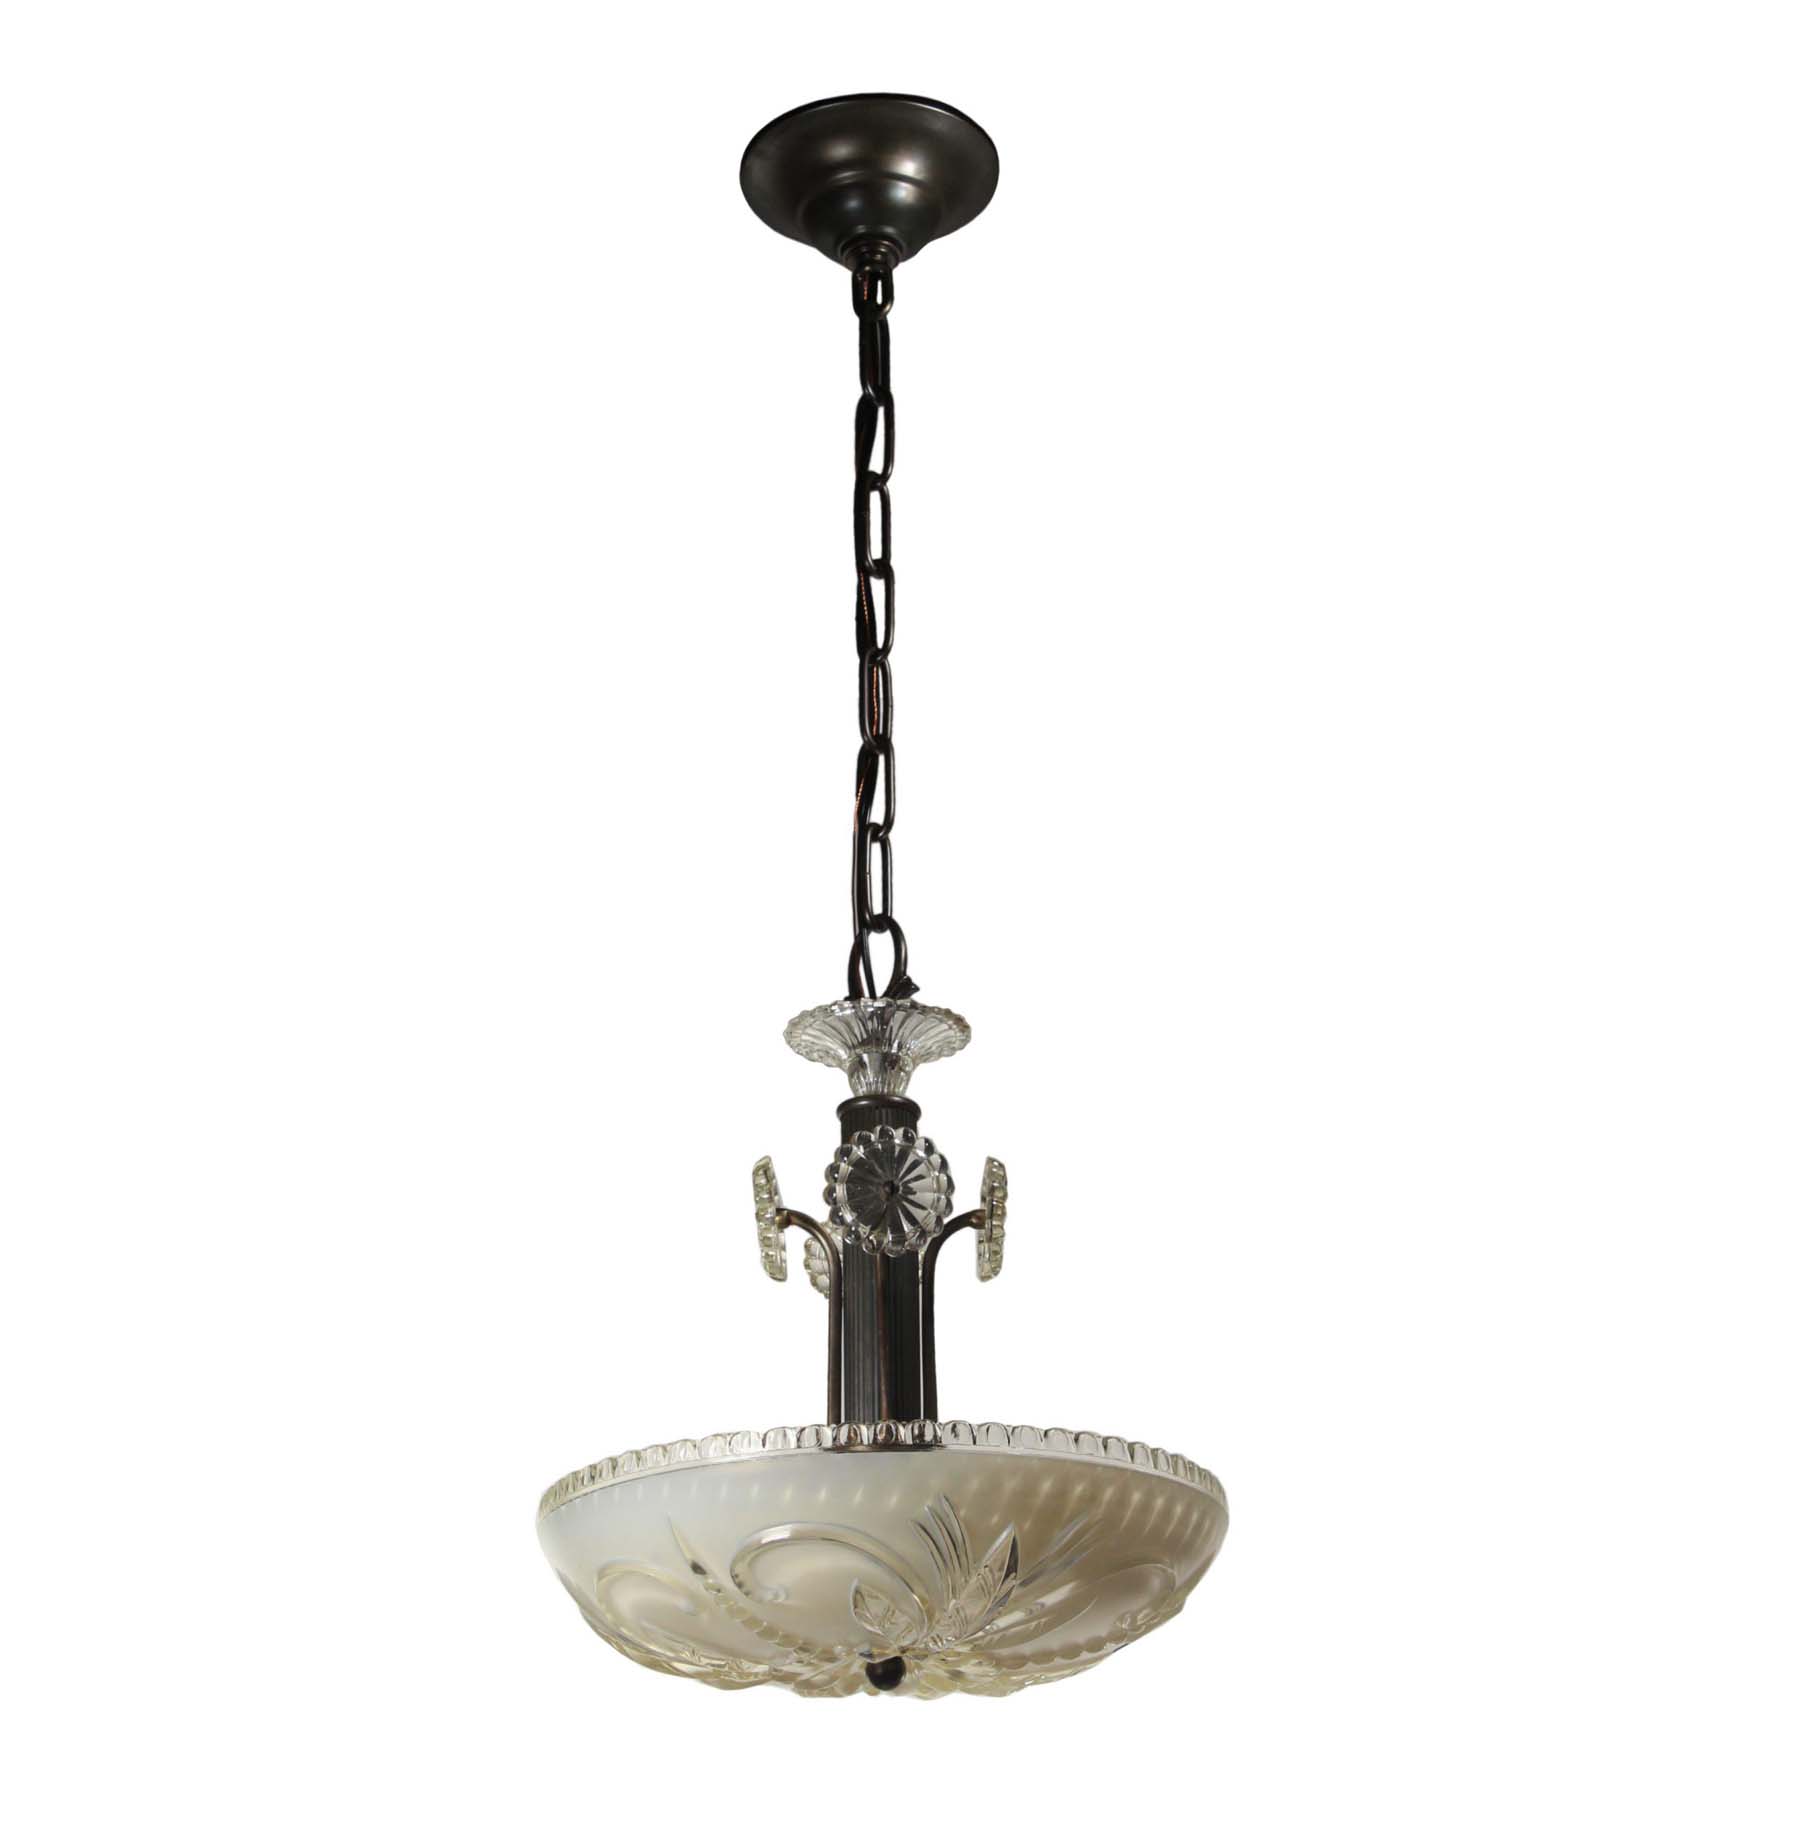 SOLD Vintage Pendant Light with Glass Shade, c. 1940’s-67535